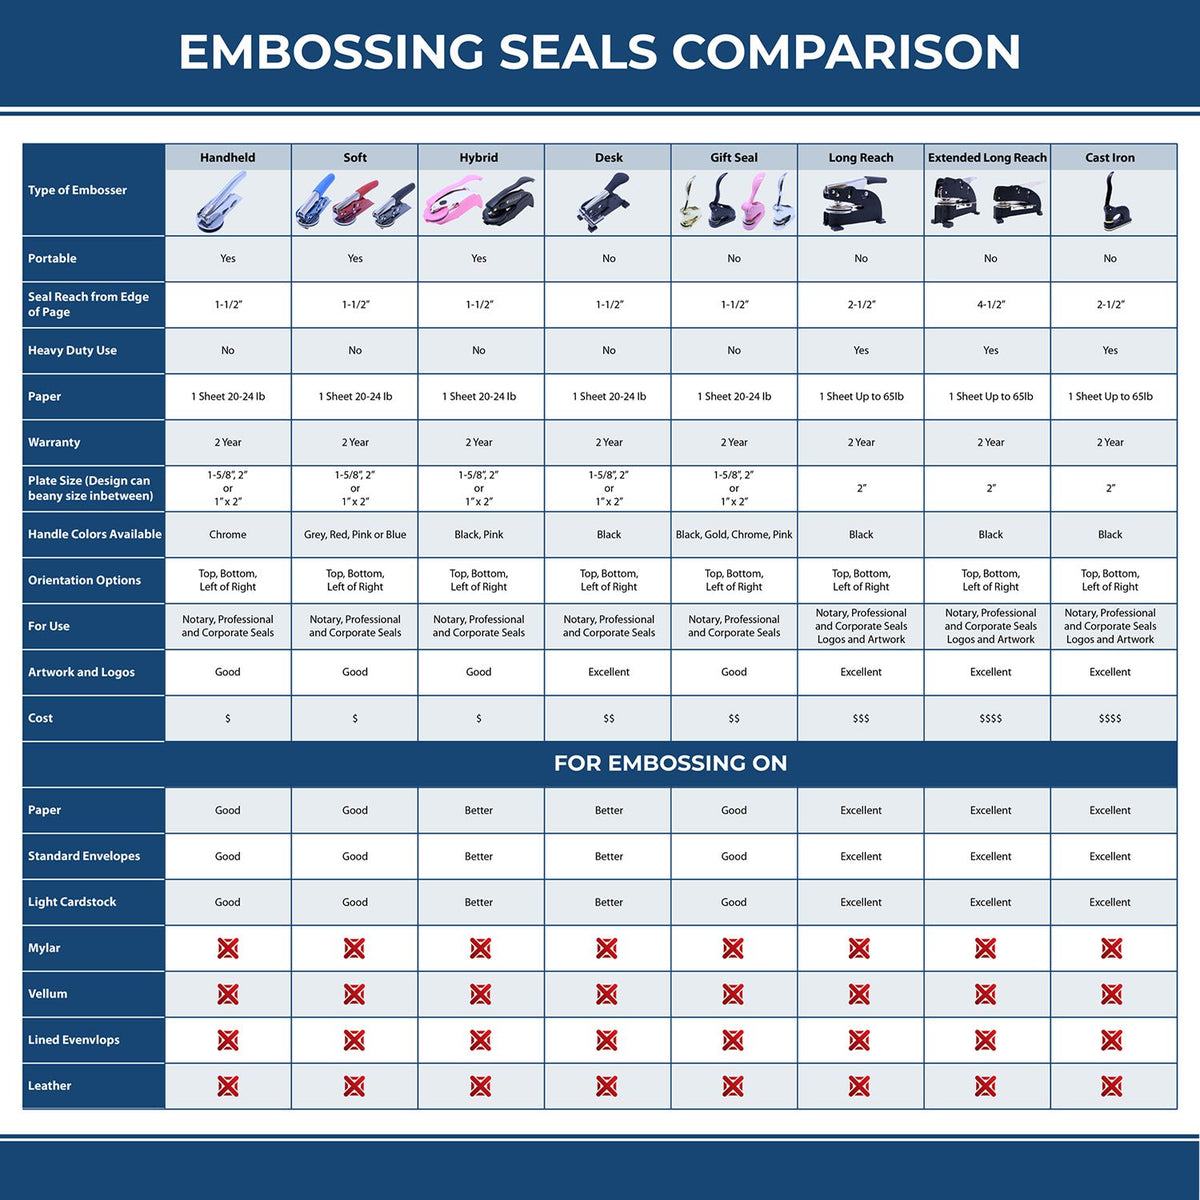 A comparison chart for the different types of mount models available for the Heavy Duty Cast Iron Nebraska Geologist Seal Embosser